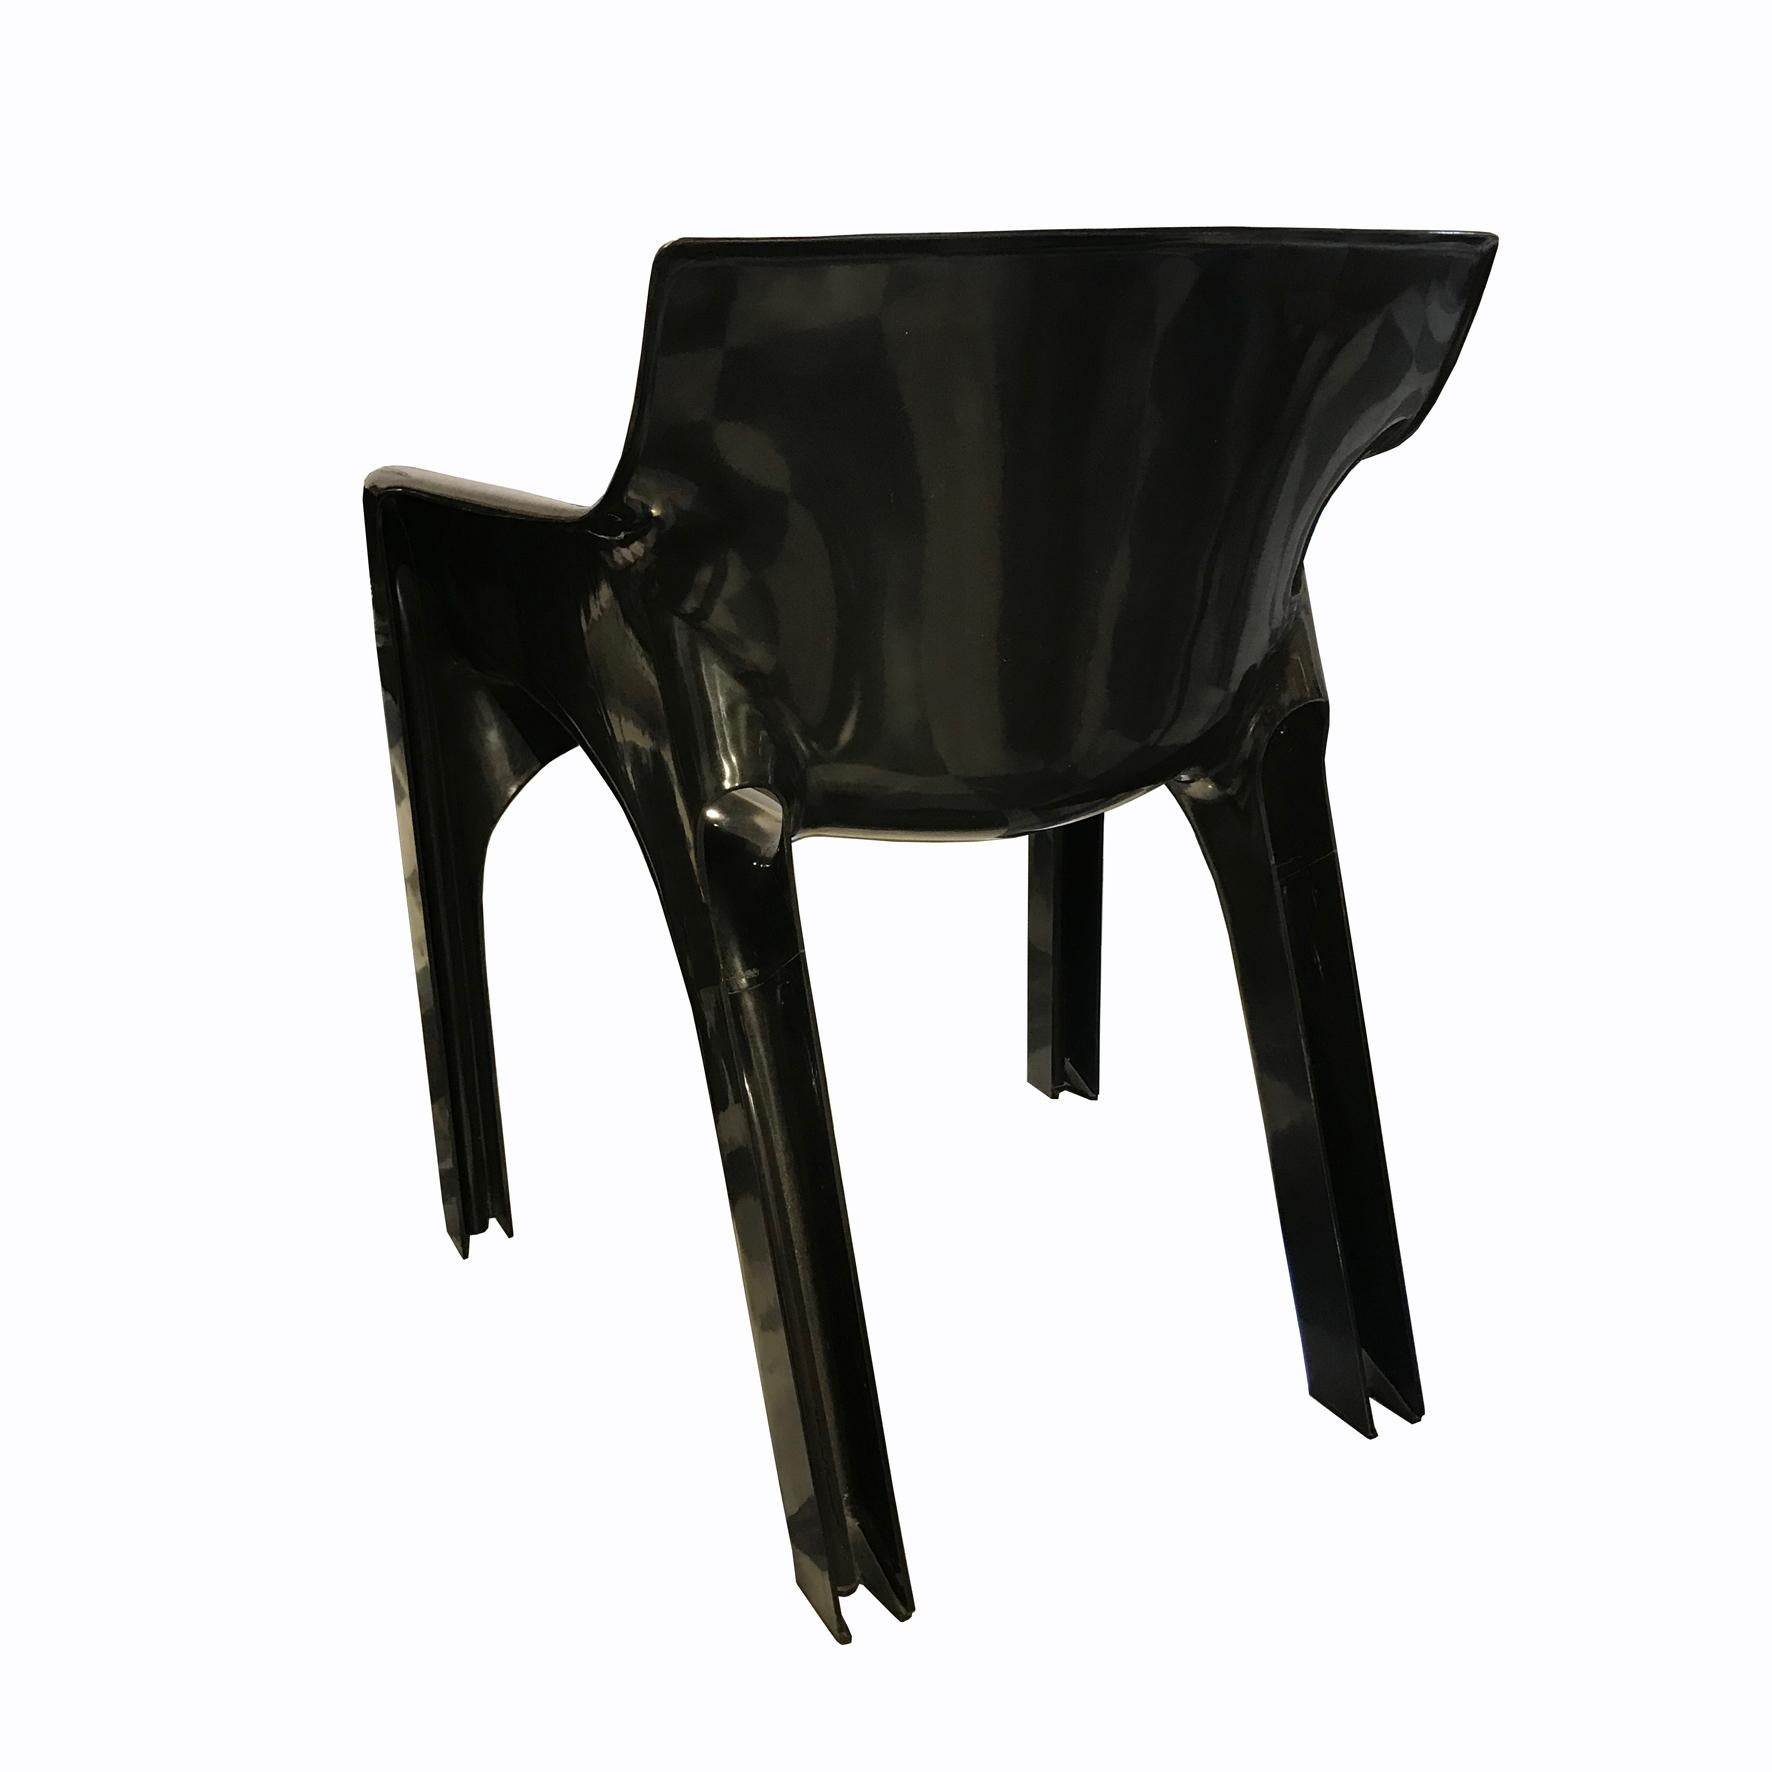 A black ABS armchair. With a bent back on four feet.
Manufactured by Artemide.
Marked underneath: “ SPA Artemide Milano, Gaudi, Vico Magistretti, Made in Italy “.
Italy,
1971.

Provenance
Private collection

Literature
Italy: The New